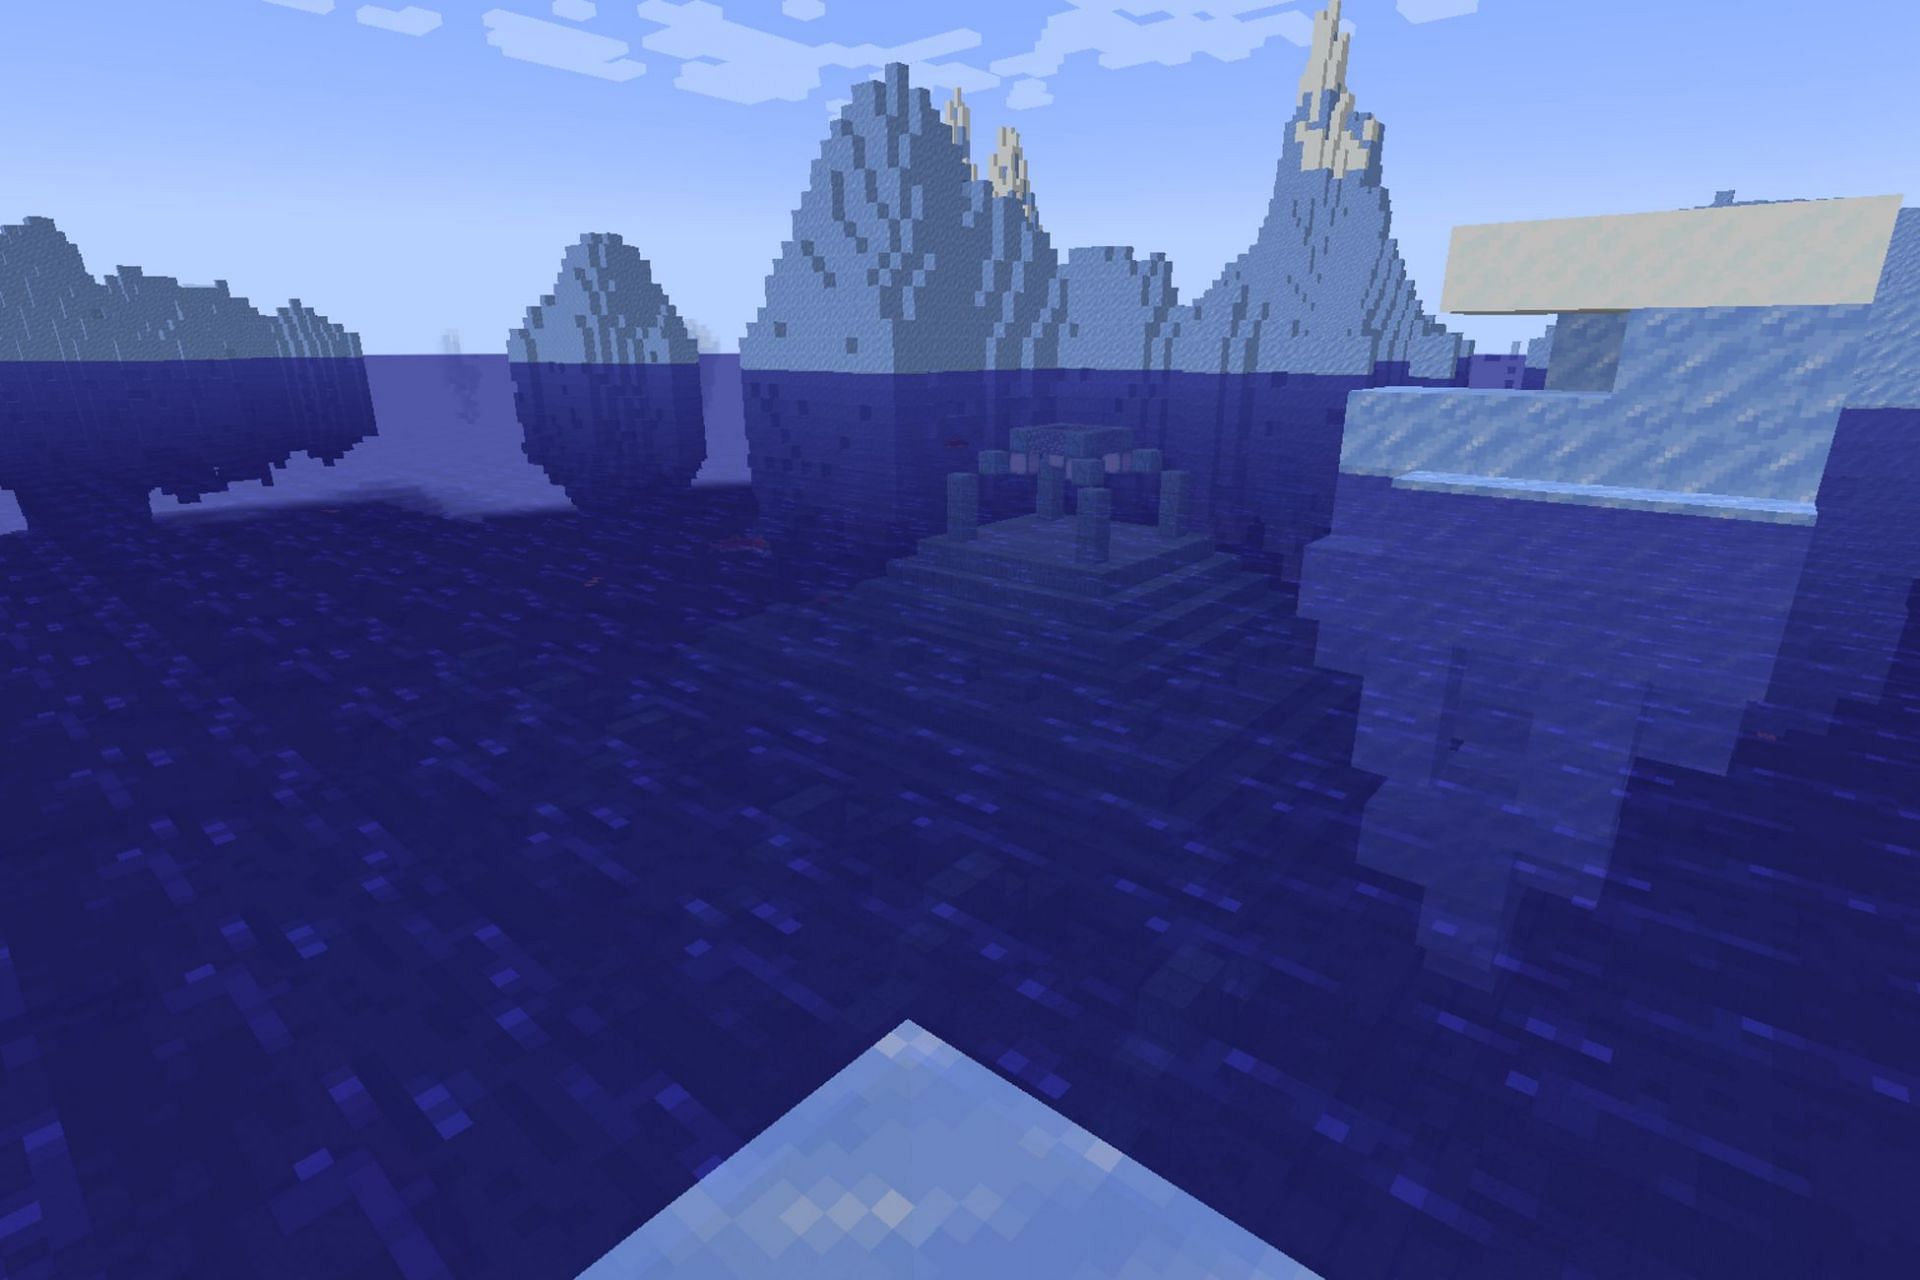 Adjacent monuments to the spawn are steeped in frozen oceans (Image via Mojang)